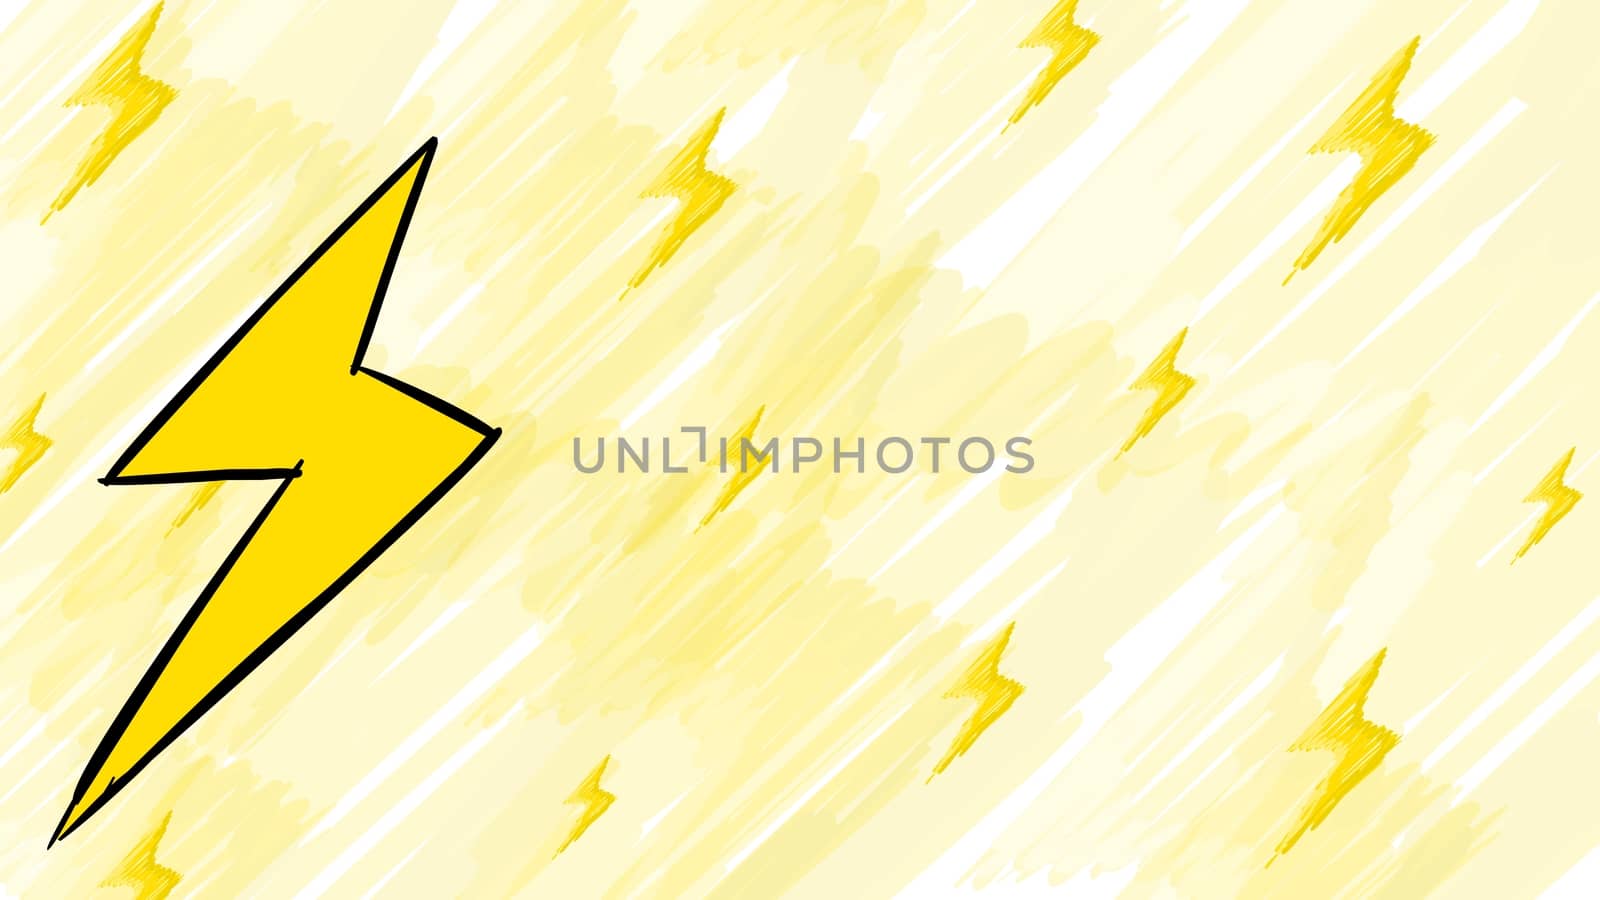 Background lightning Cartoon Sketch Drawing Style with white background. electric, yellow, power, electric, Thunder, Storm, Flash, light sign. by Andreajk3